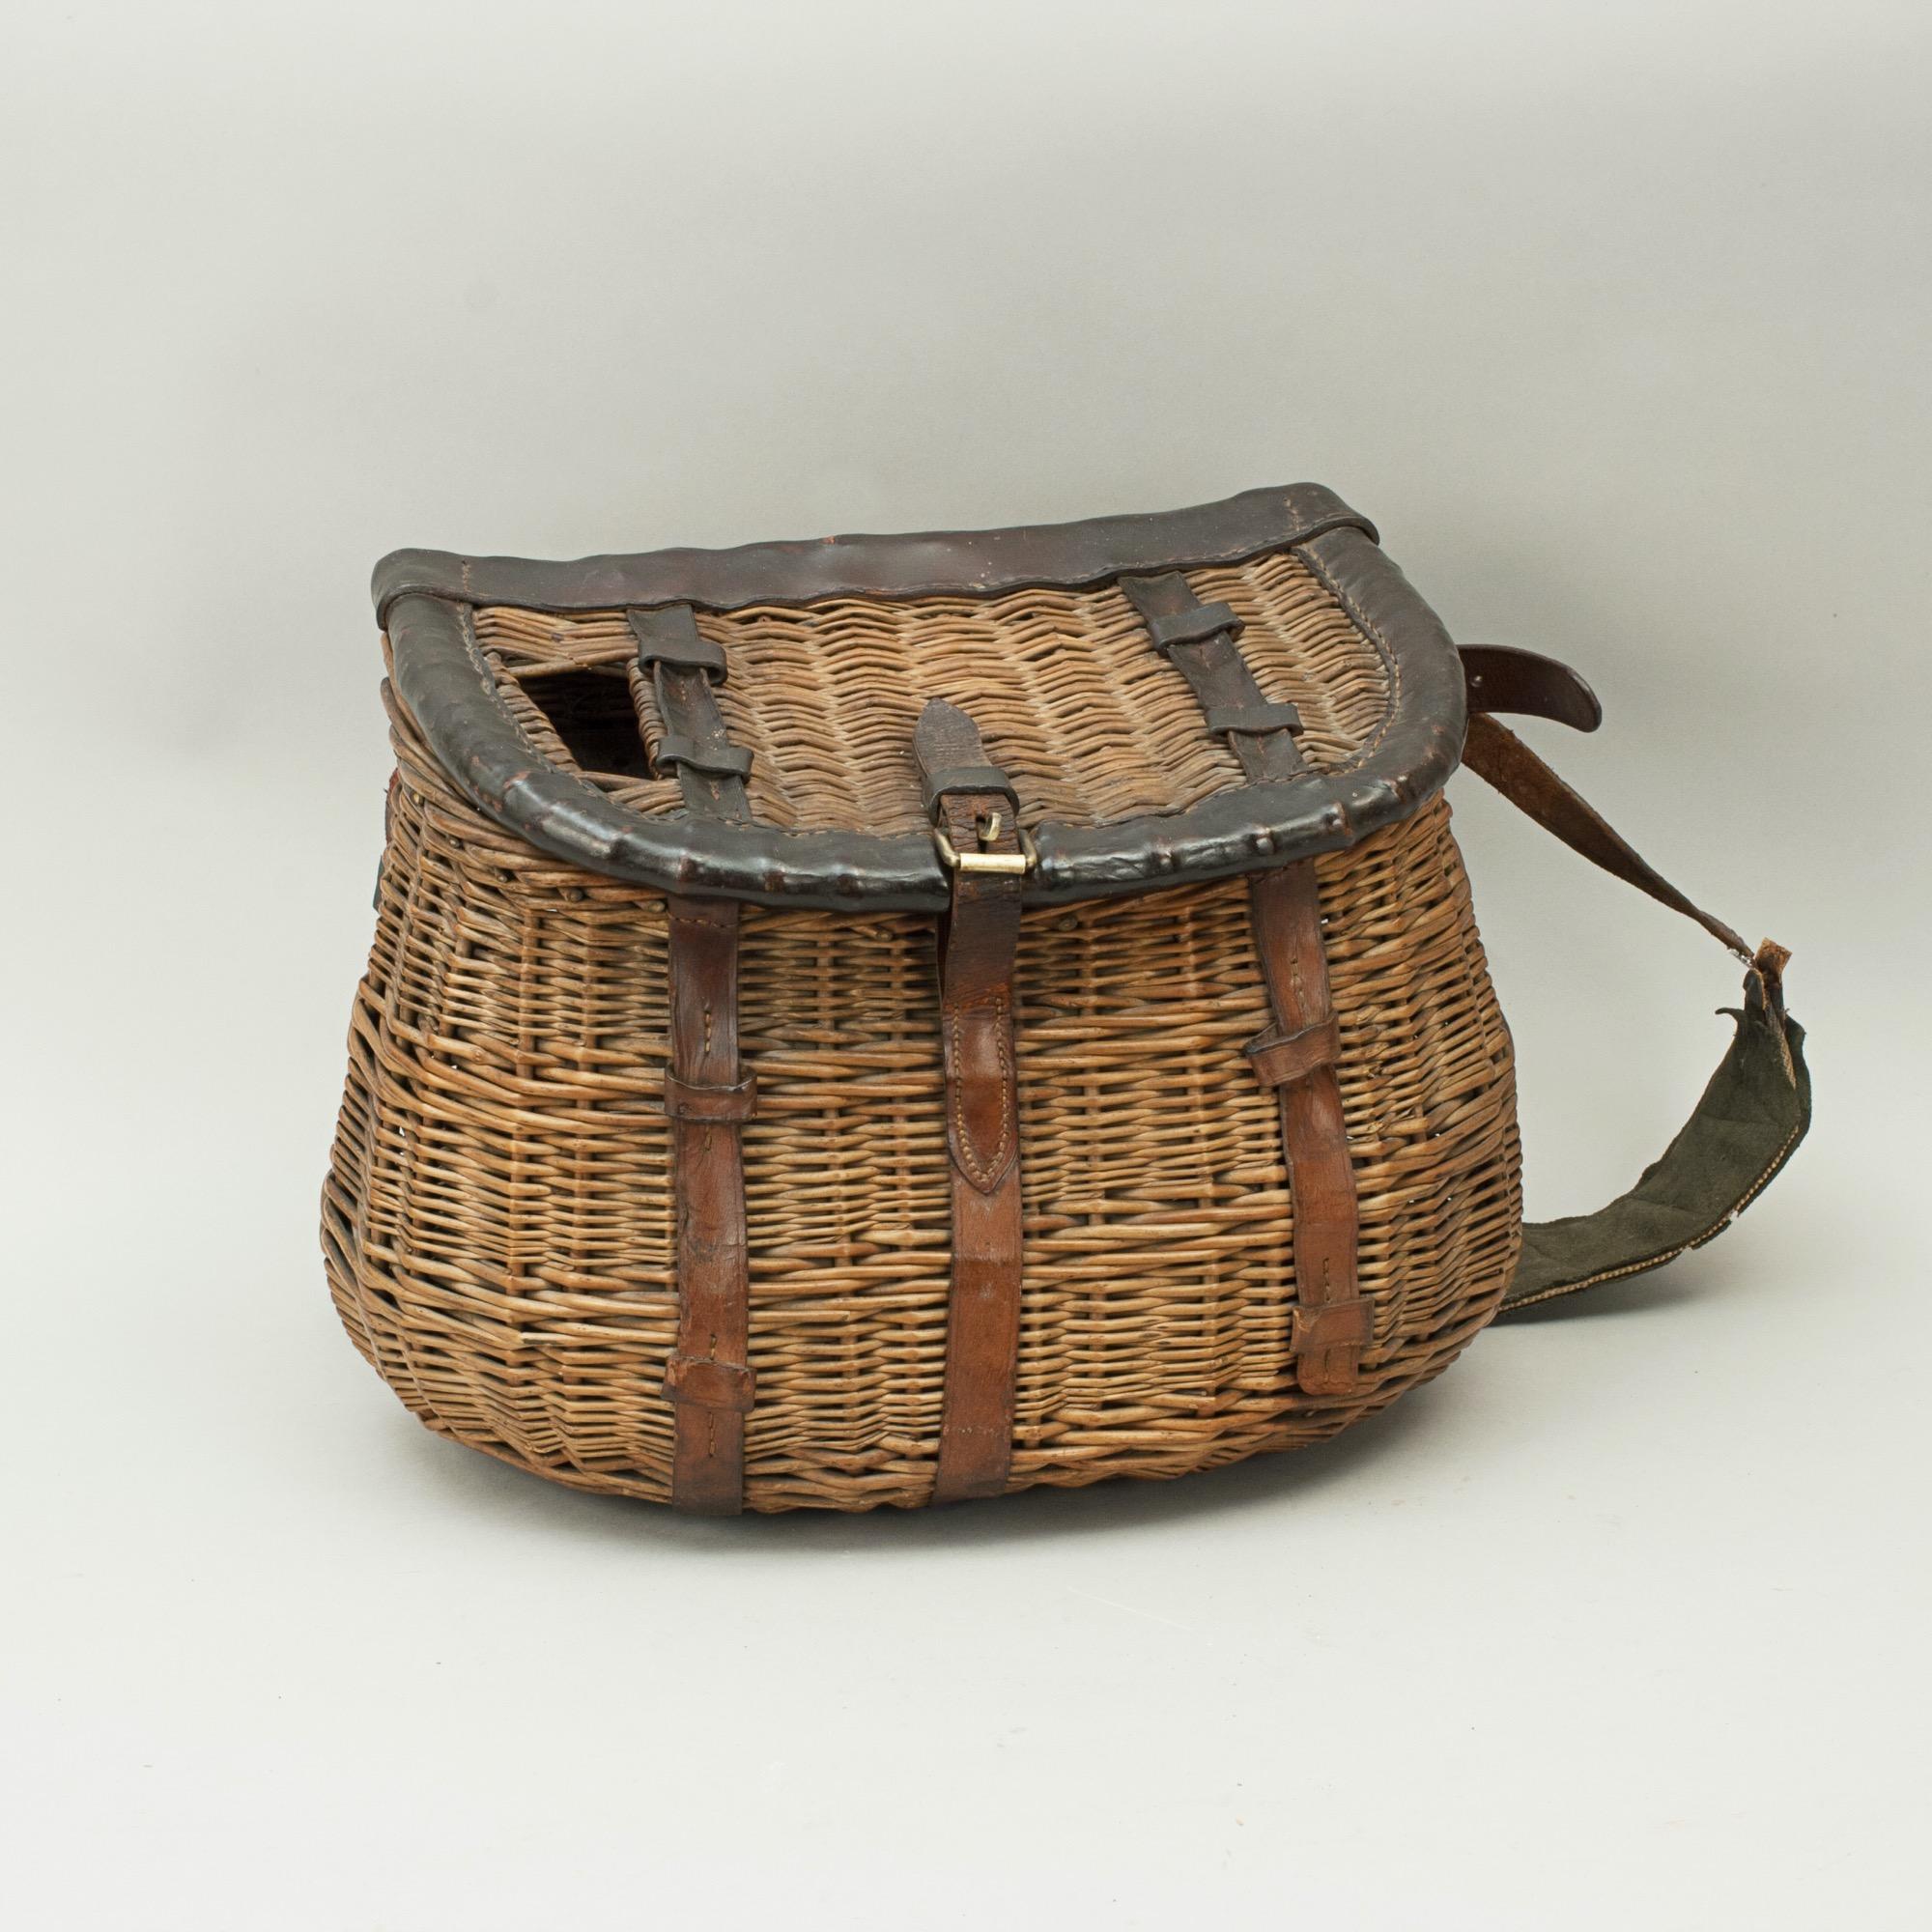 Vintage wicker creel.
A very good example of an early wicker fishing creel. The finely woven wicker creel is made in the traditional design and is with leather trim and leather and canvas shoulder strap.
The creel was an important piece of